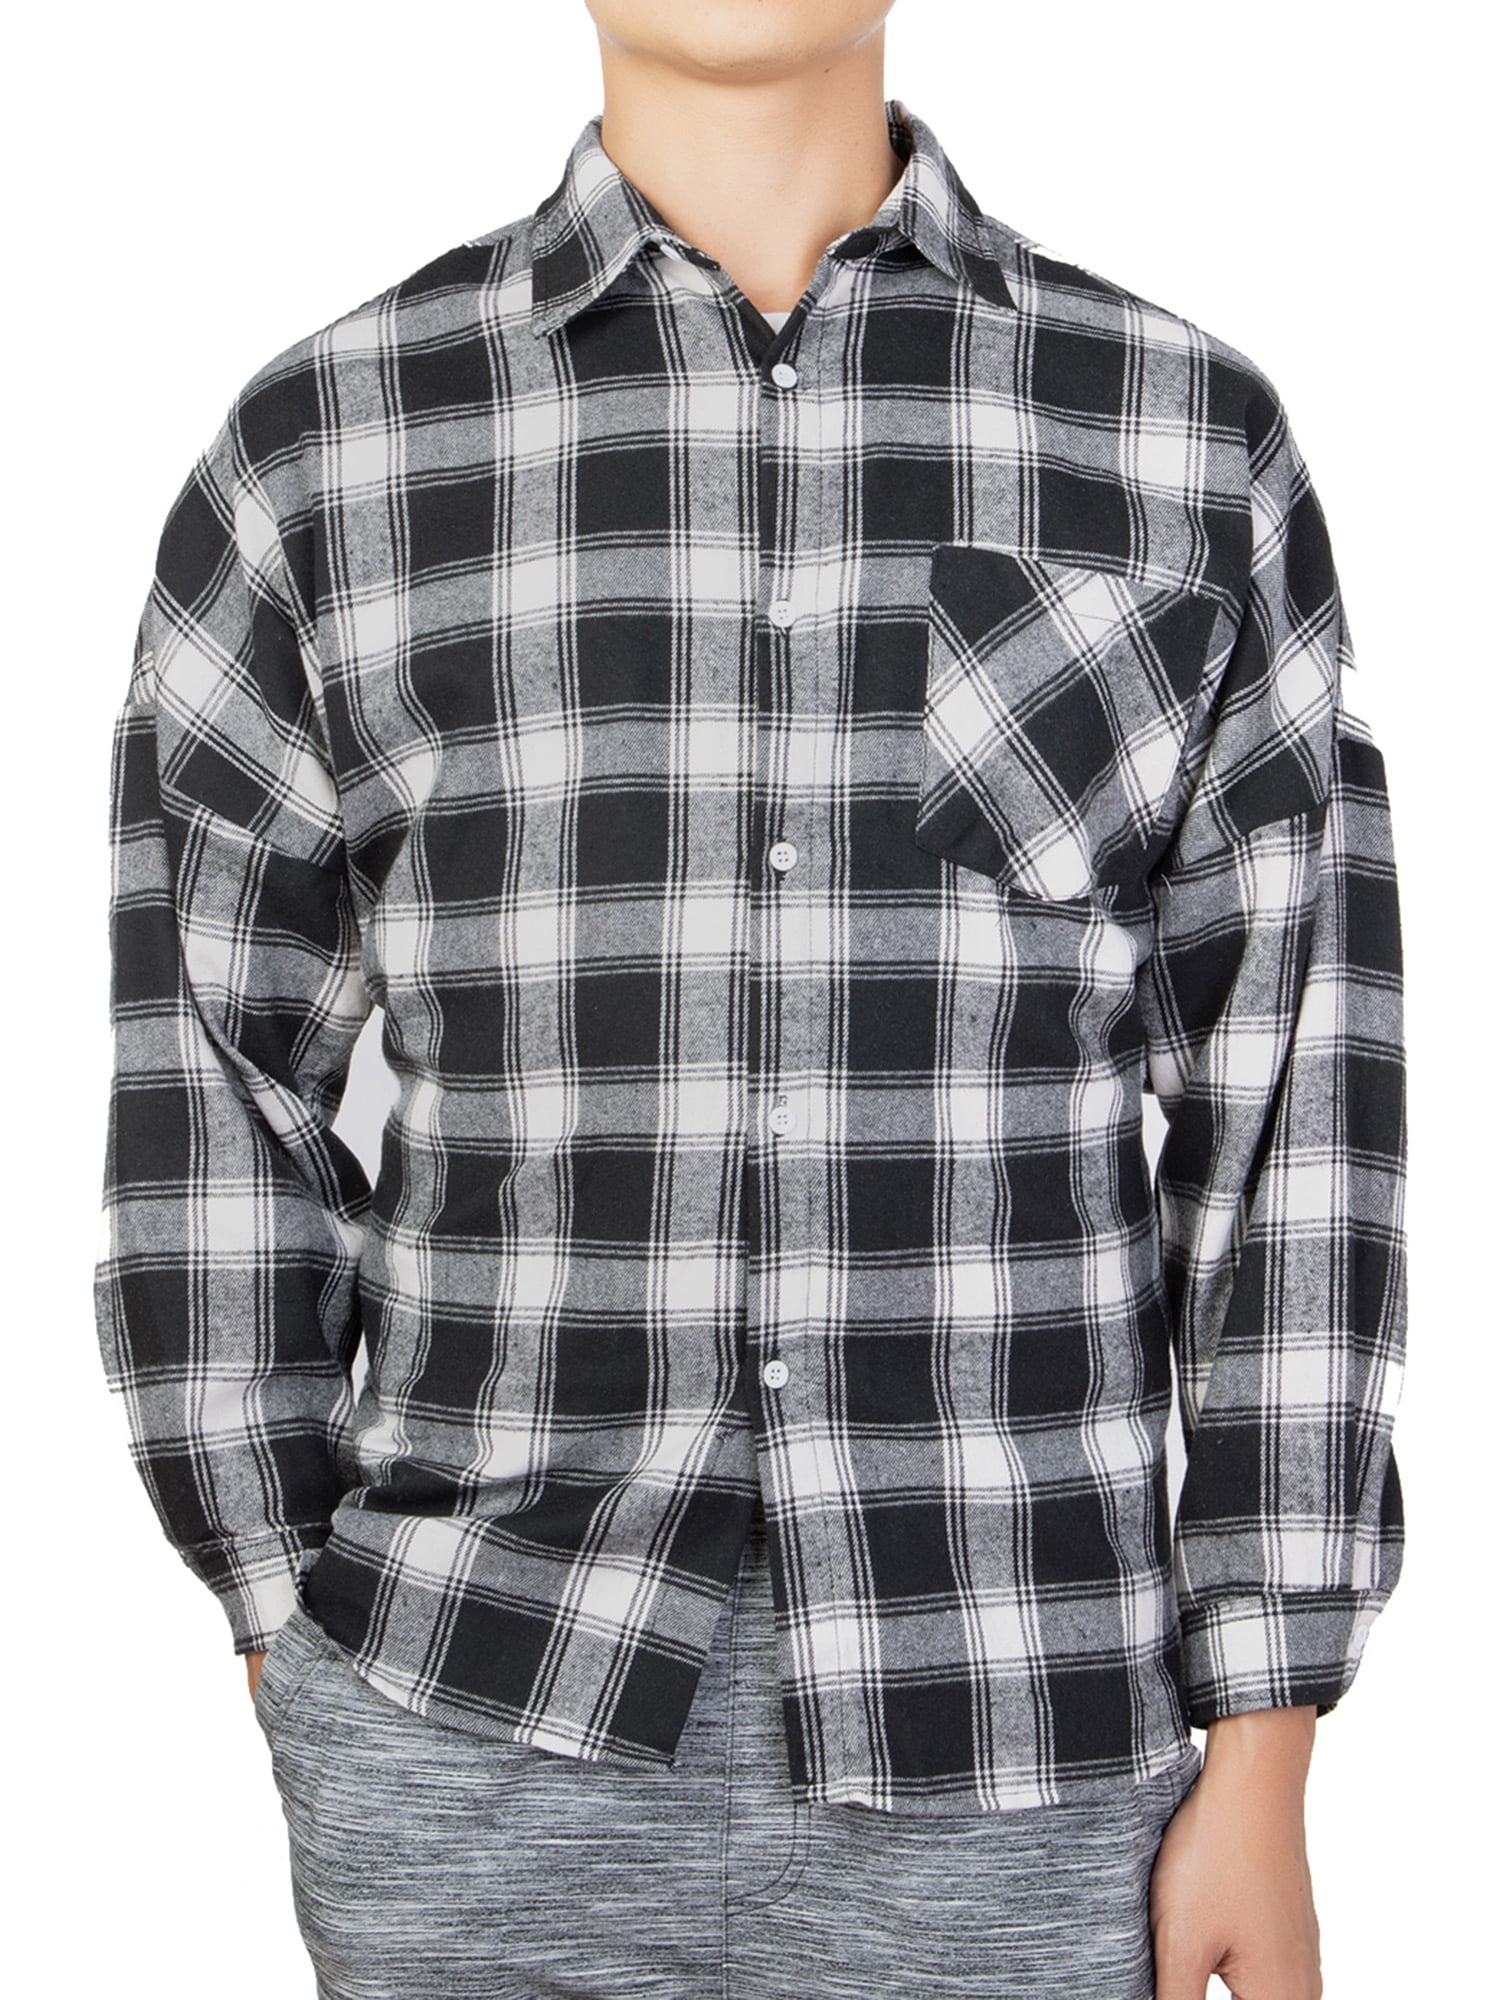 Men's Flannel Long Sleeved Button-Up Plaid All-Cotton Brushed Shirt ...